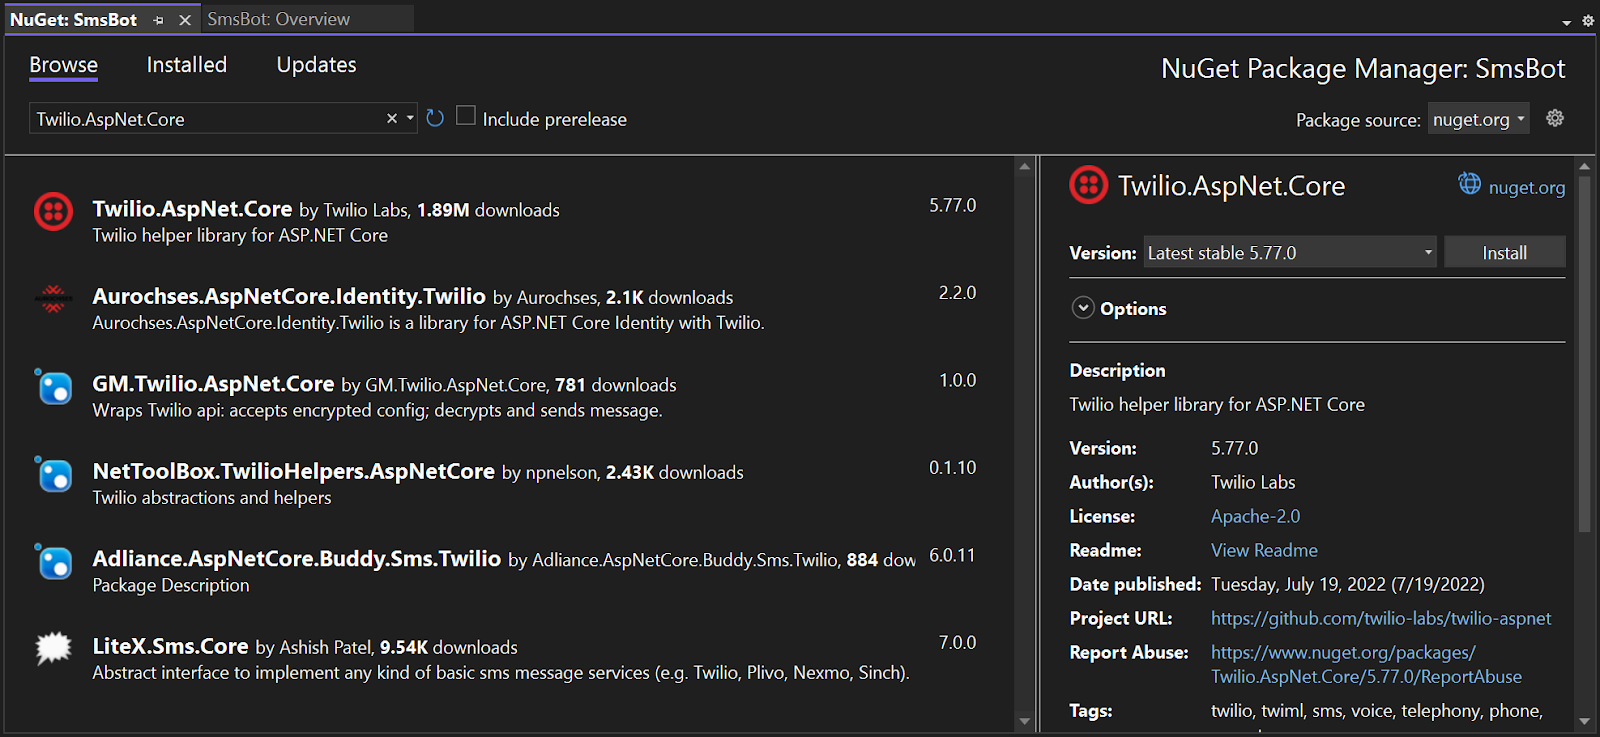 NuGet Package Manager window in Visual Studio searching for "Twilio.AspNet.Core". The "Twilio.AspNet.Core" package is selected and an install button is shown.